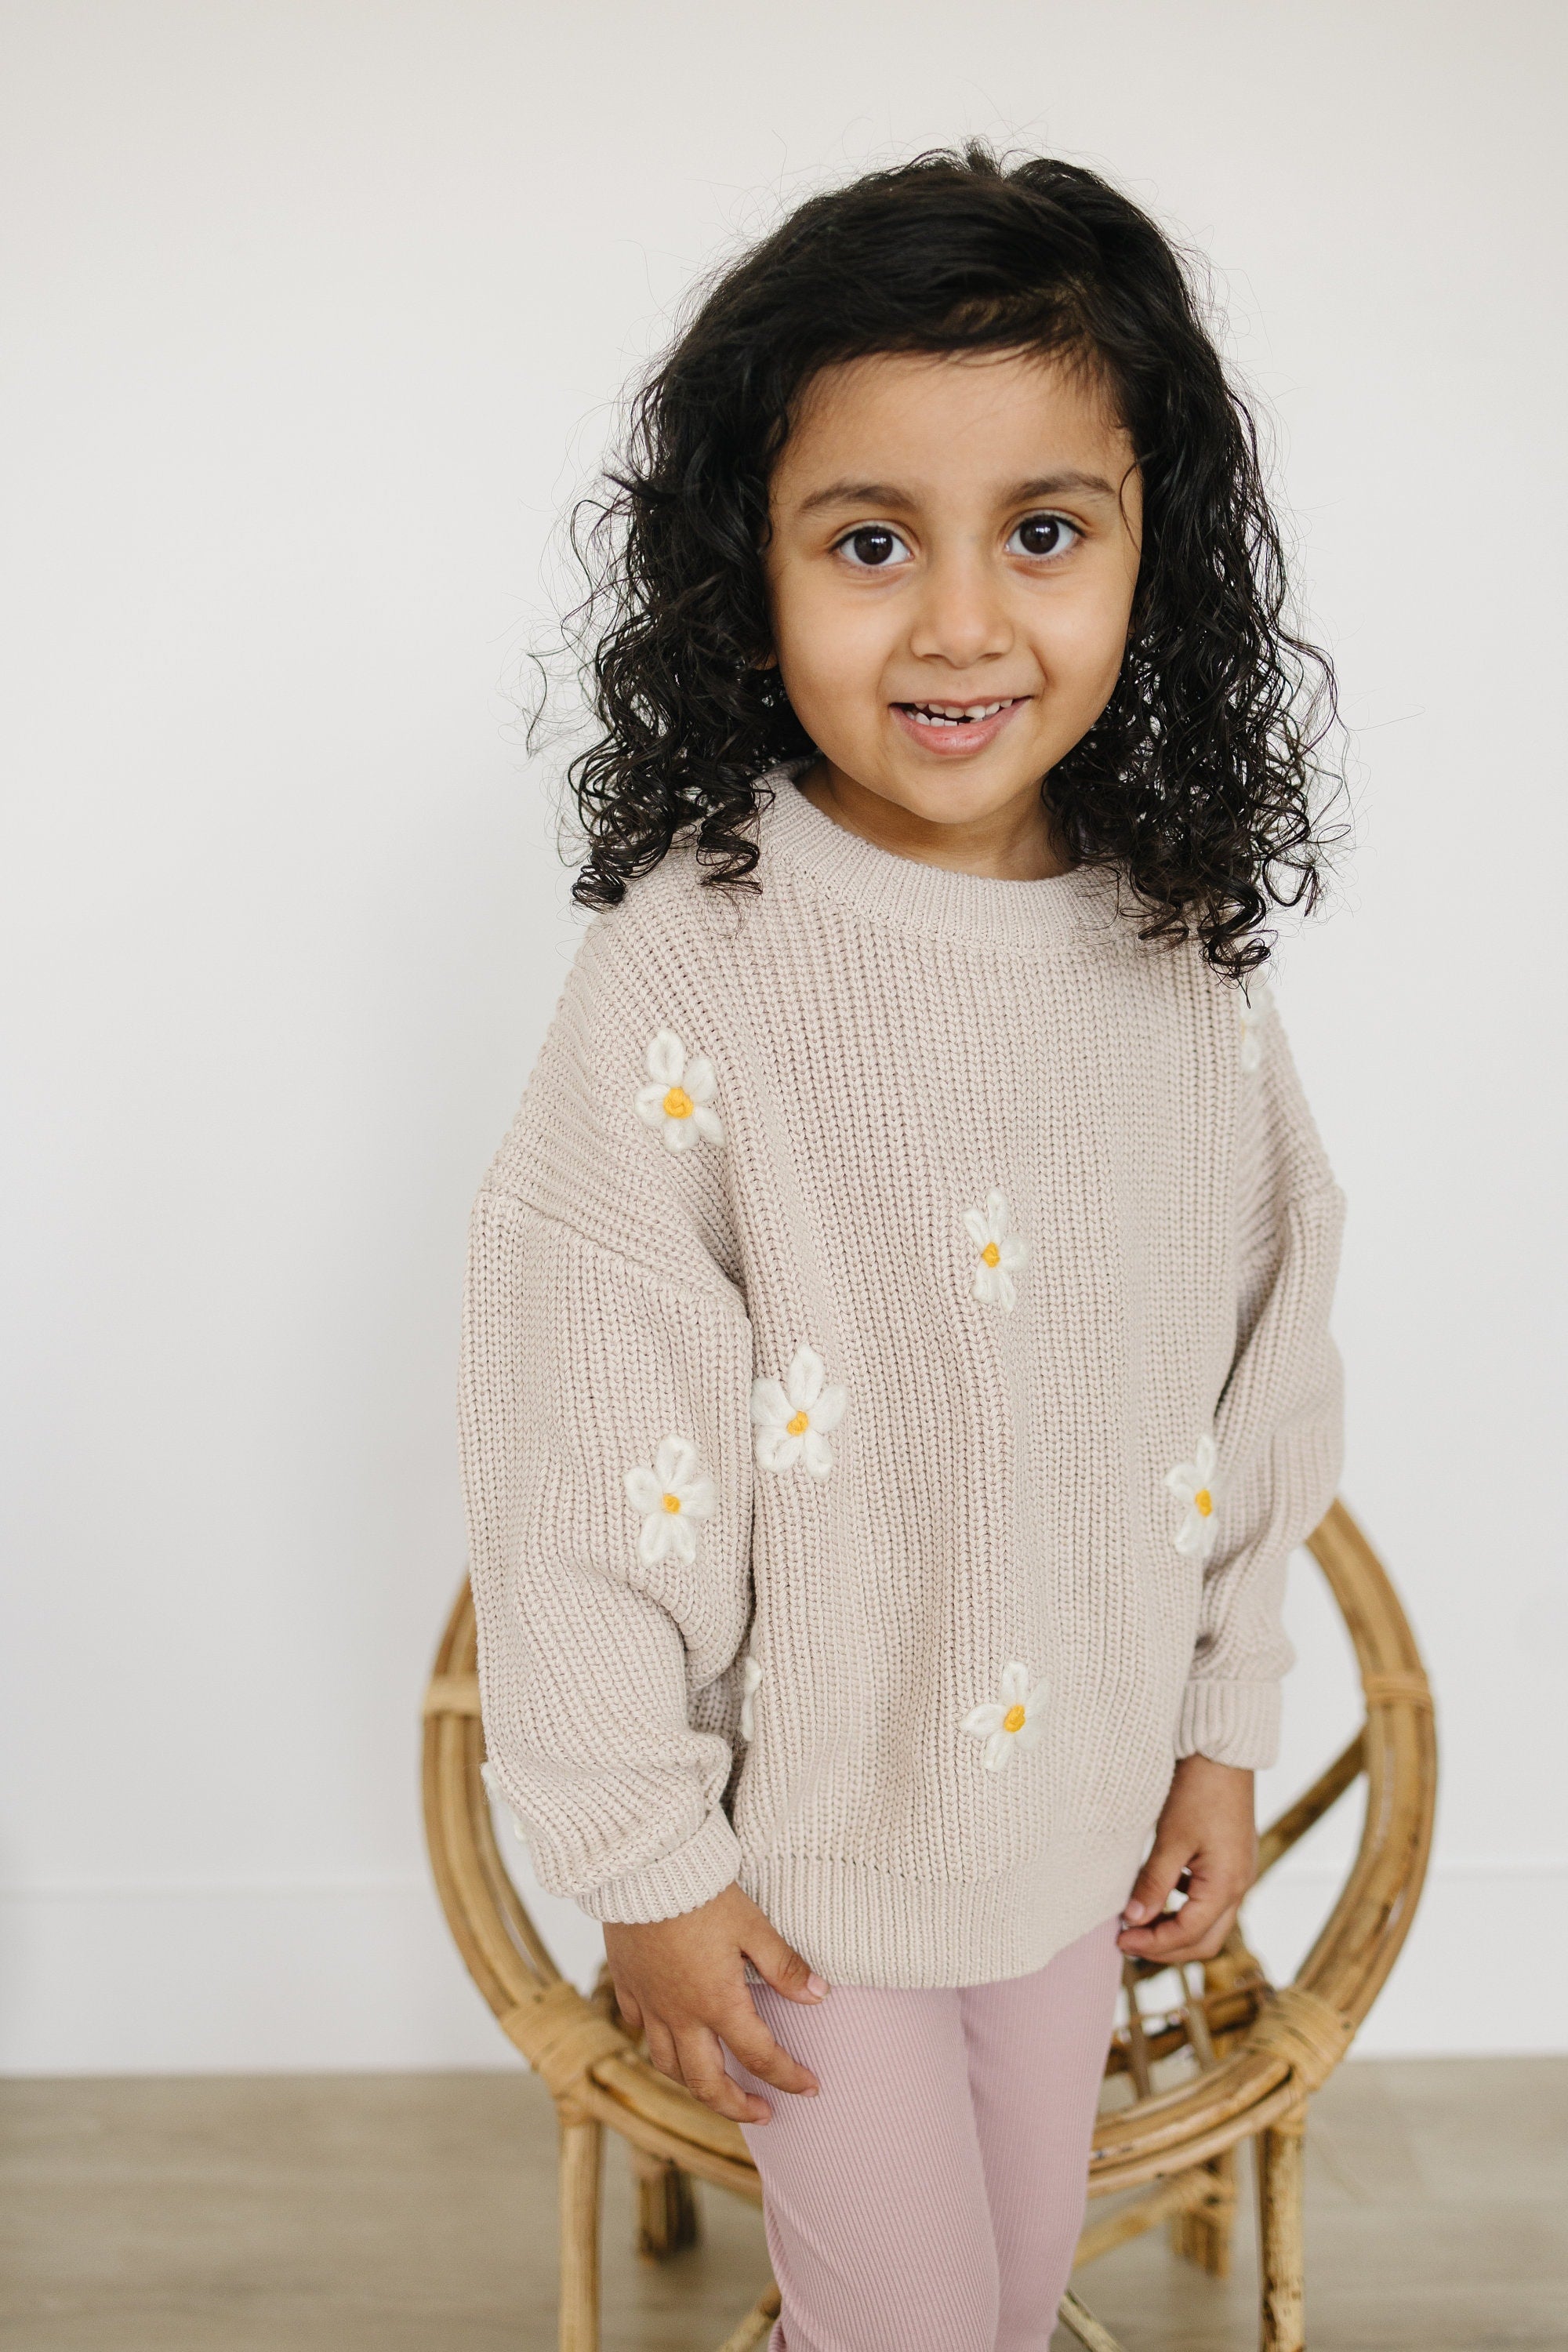 Neutral Daisy Hand Embroidered Chunky Knit Sweater for Babies & Toddlers - Flower Embroidered Baby Sweater - Baby Girl Toddler Floral Top